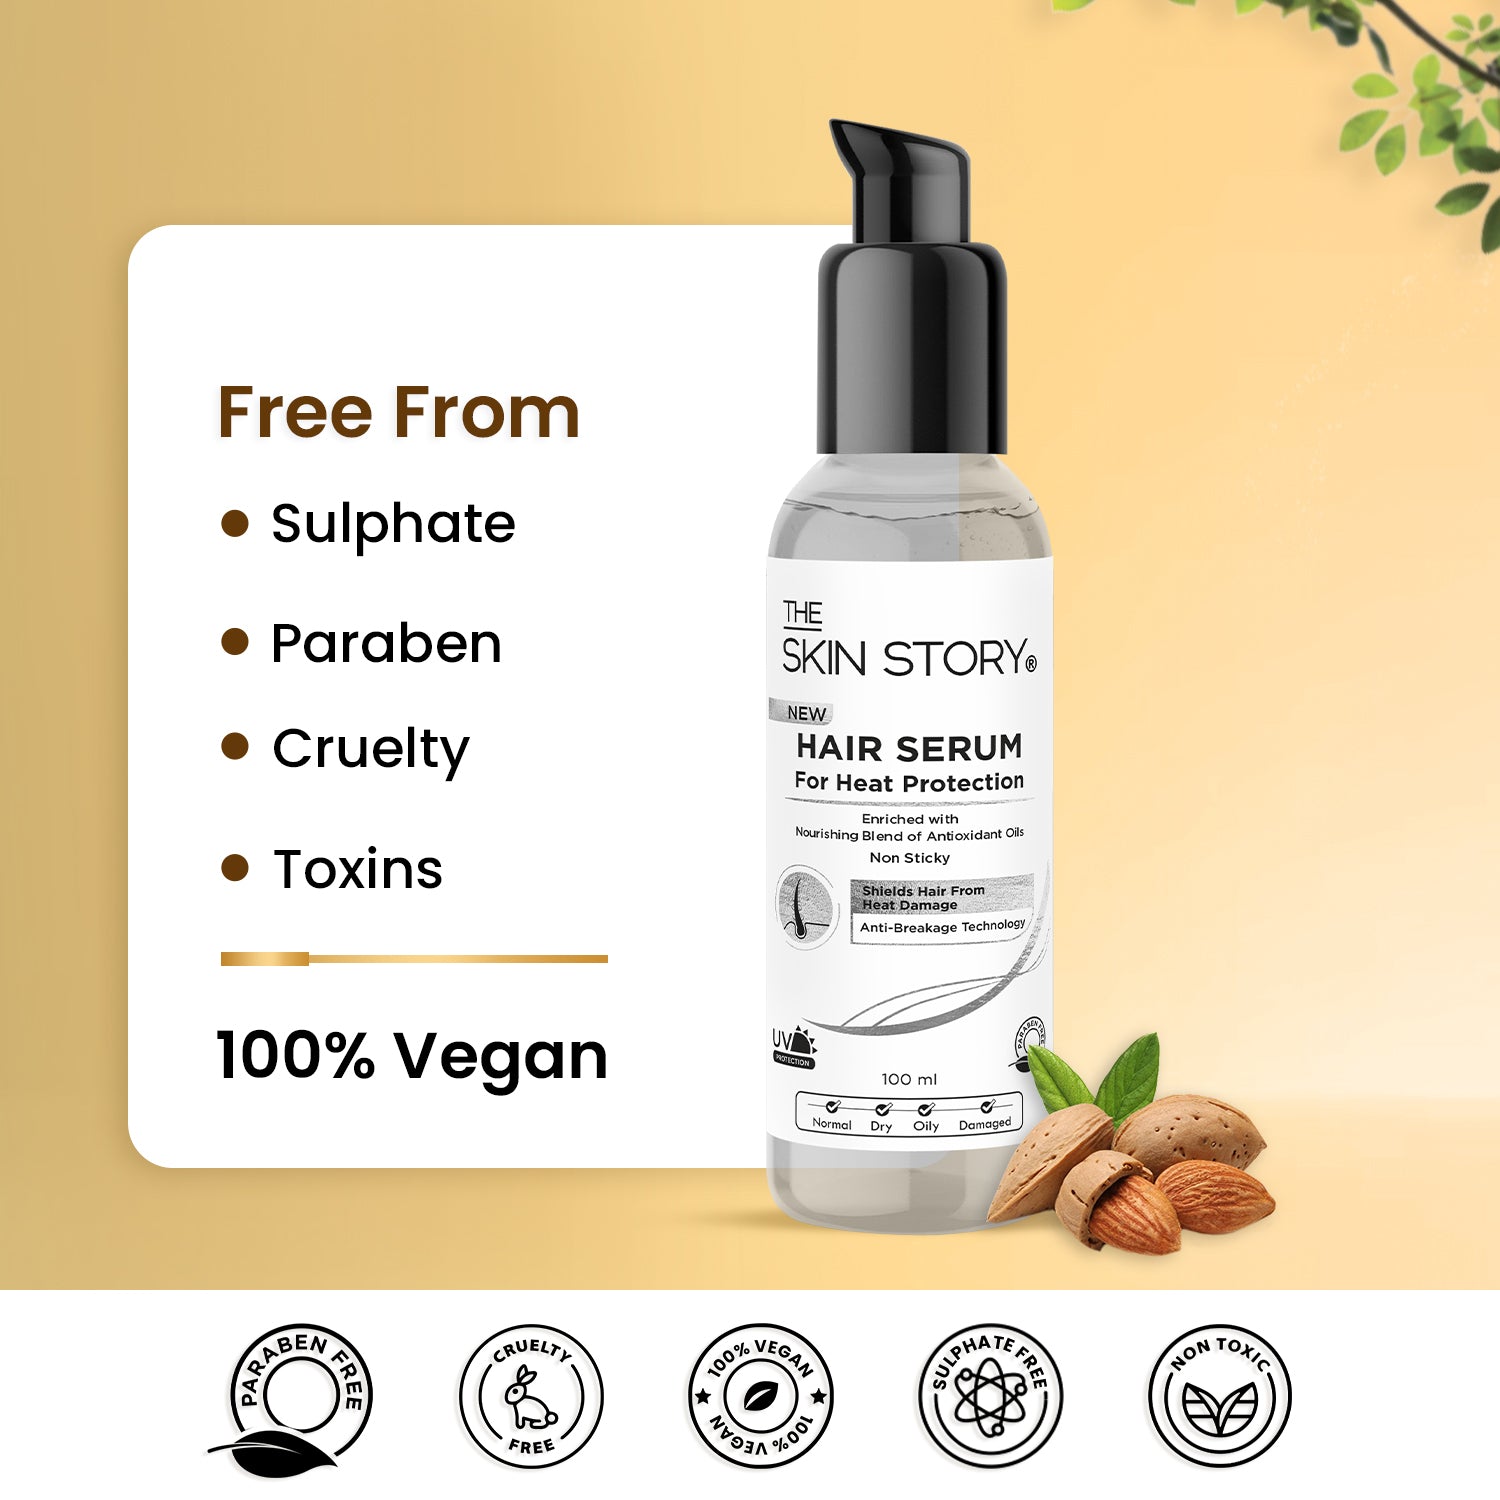 The Skin Story Heat Protection Hair Serum , Anti Hair Breakage Technology | For Protection Against Heating Tools, Non Sticky Hair Serum, 100ml